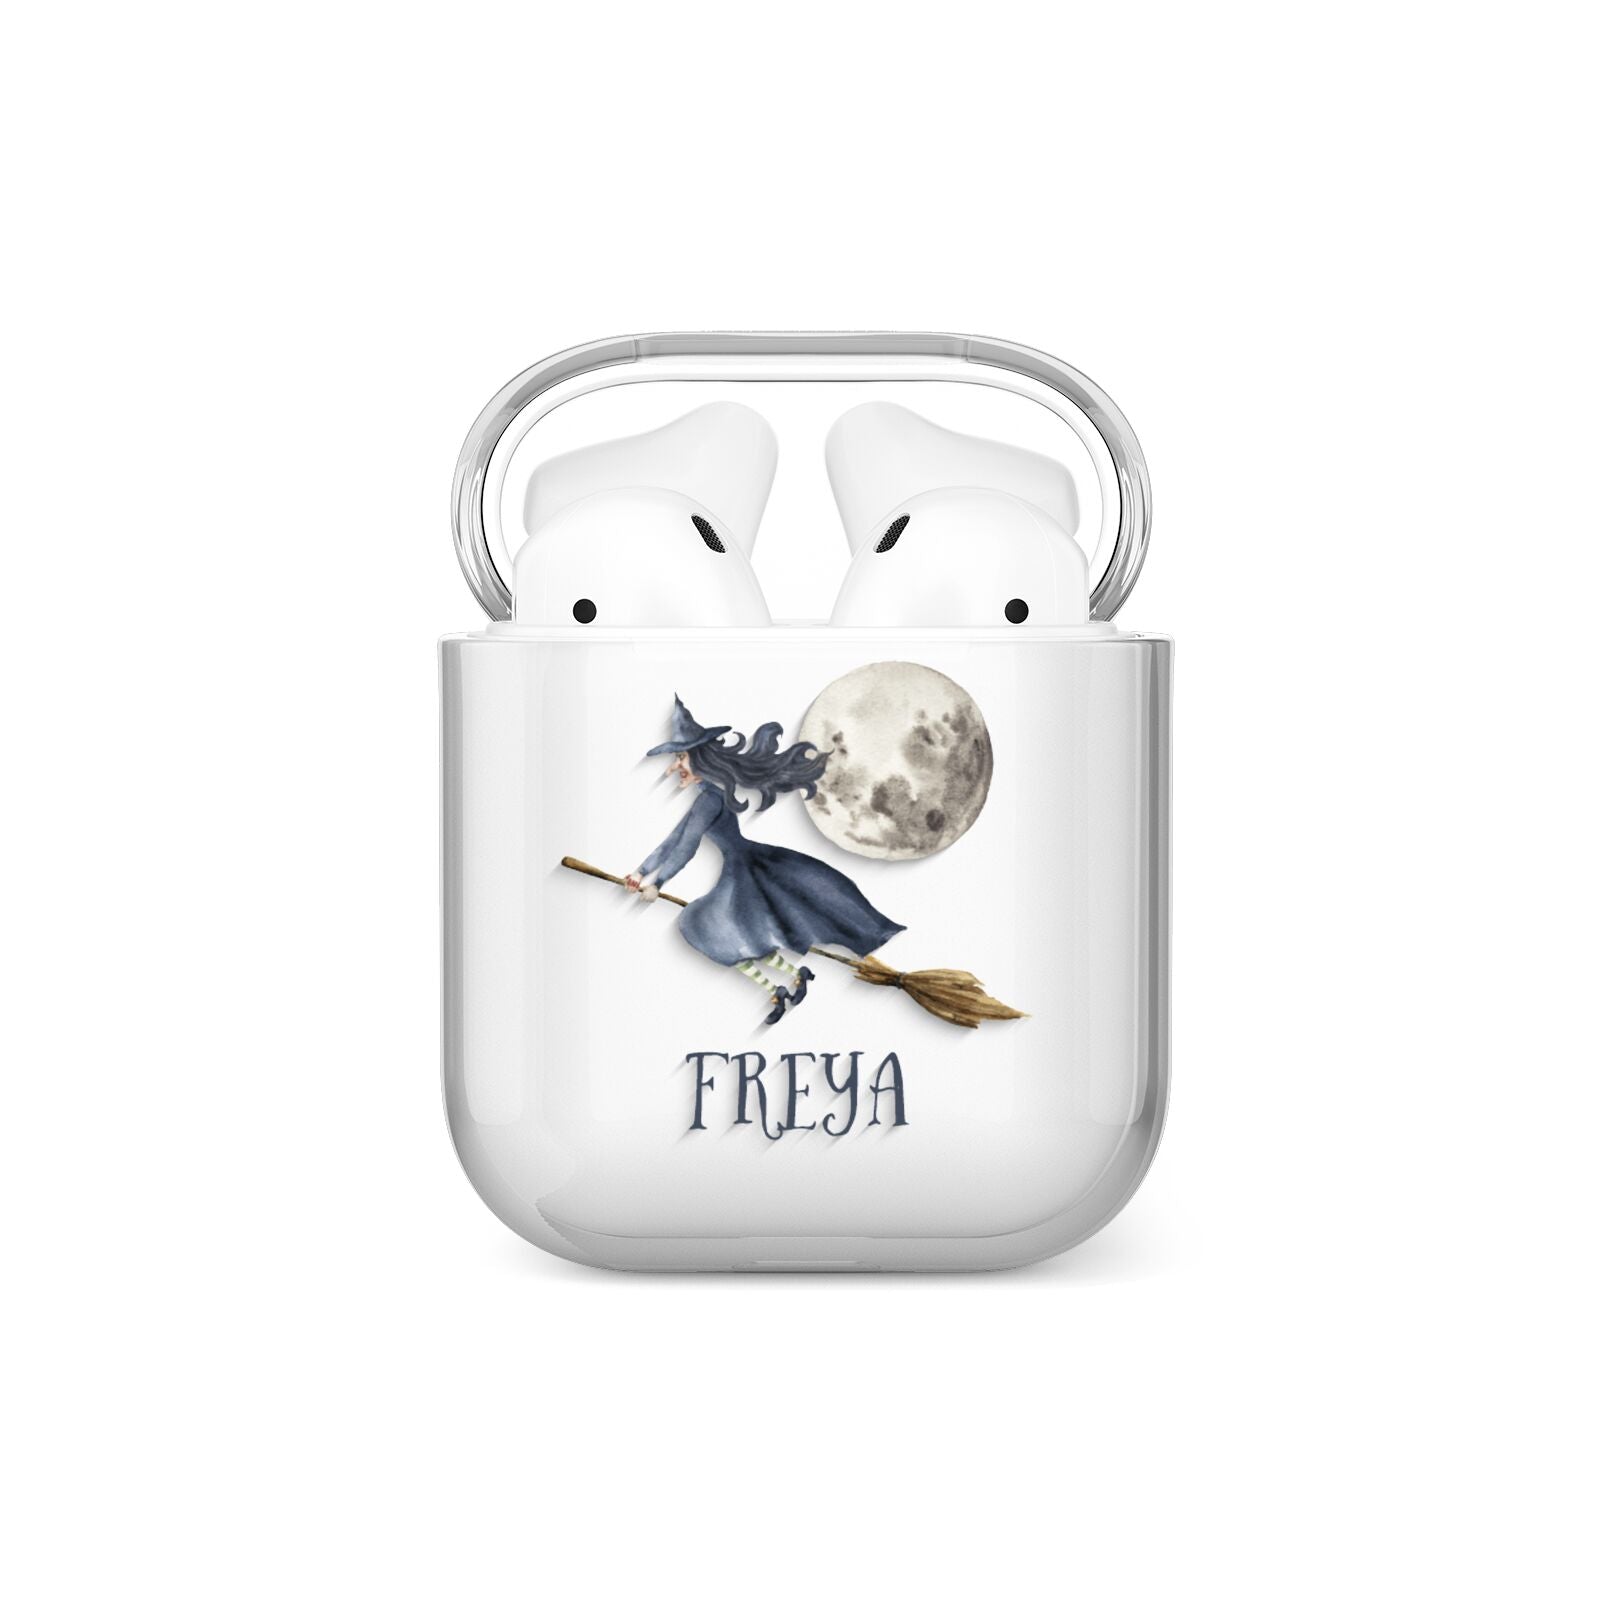 Treetop Halloween Witch AirPods Case